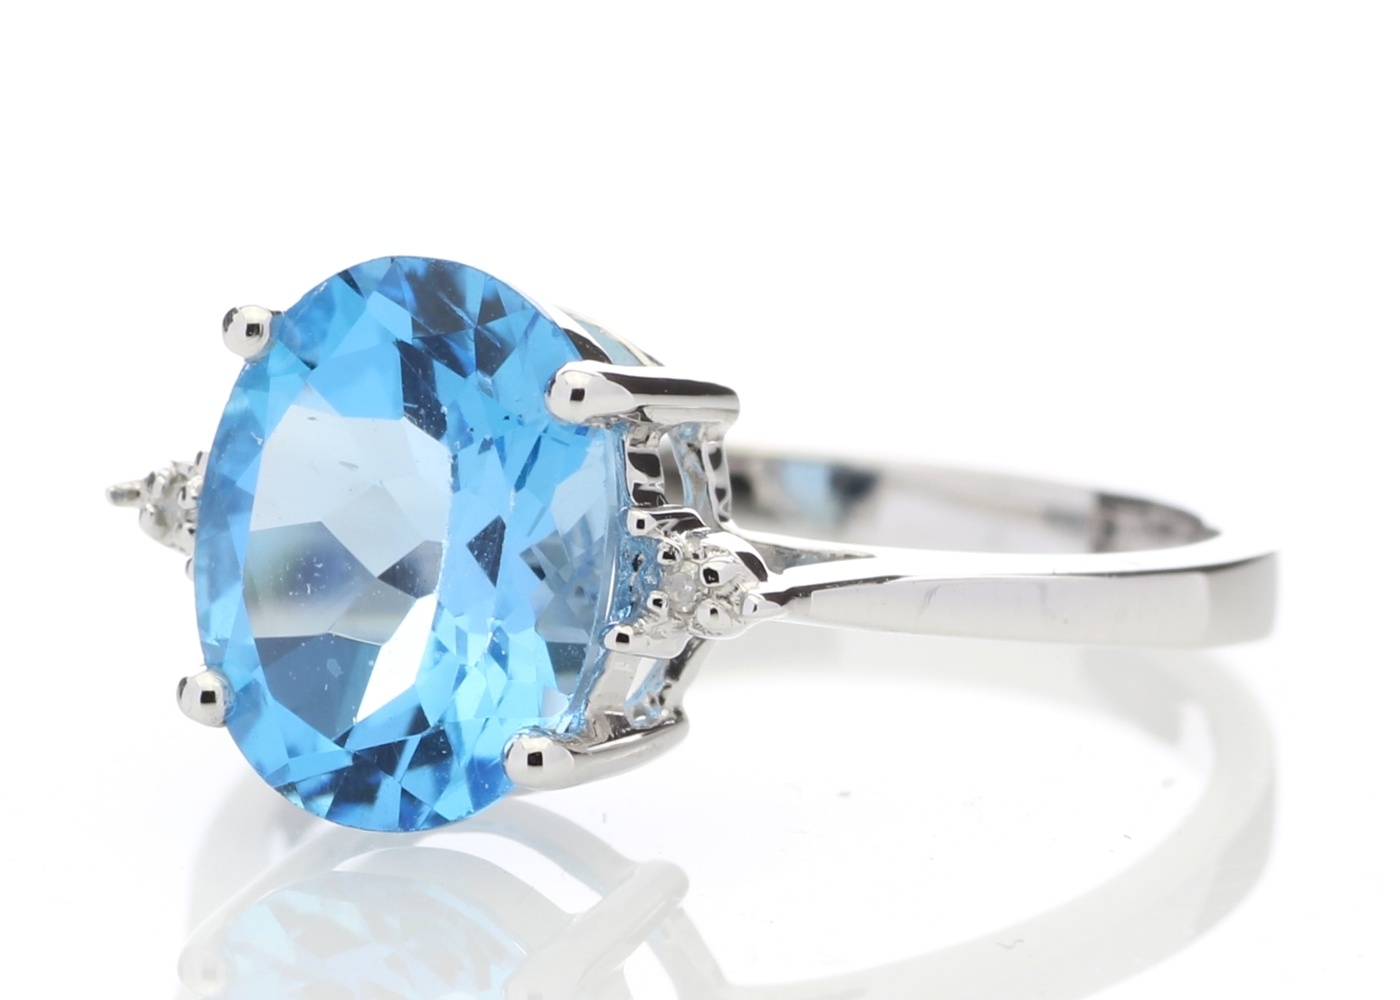 9ct White Gold Diamond And Blue Topaz Ring - Image 2 of 6